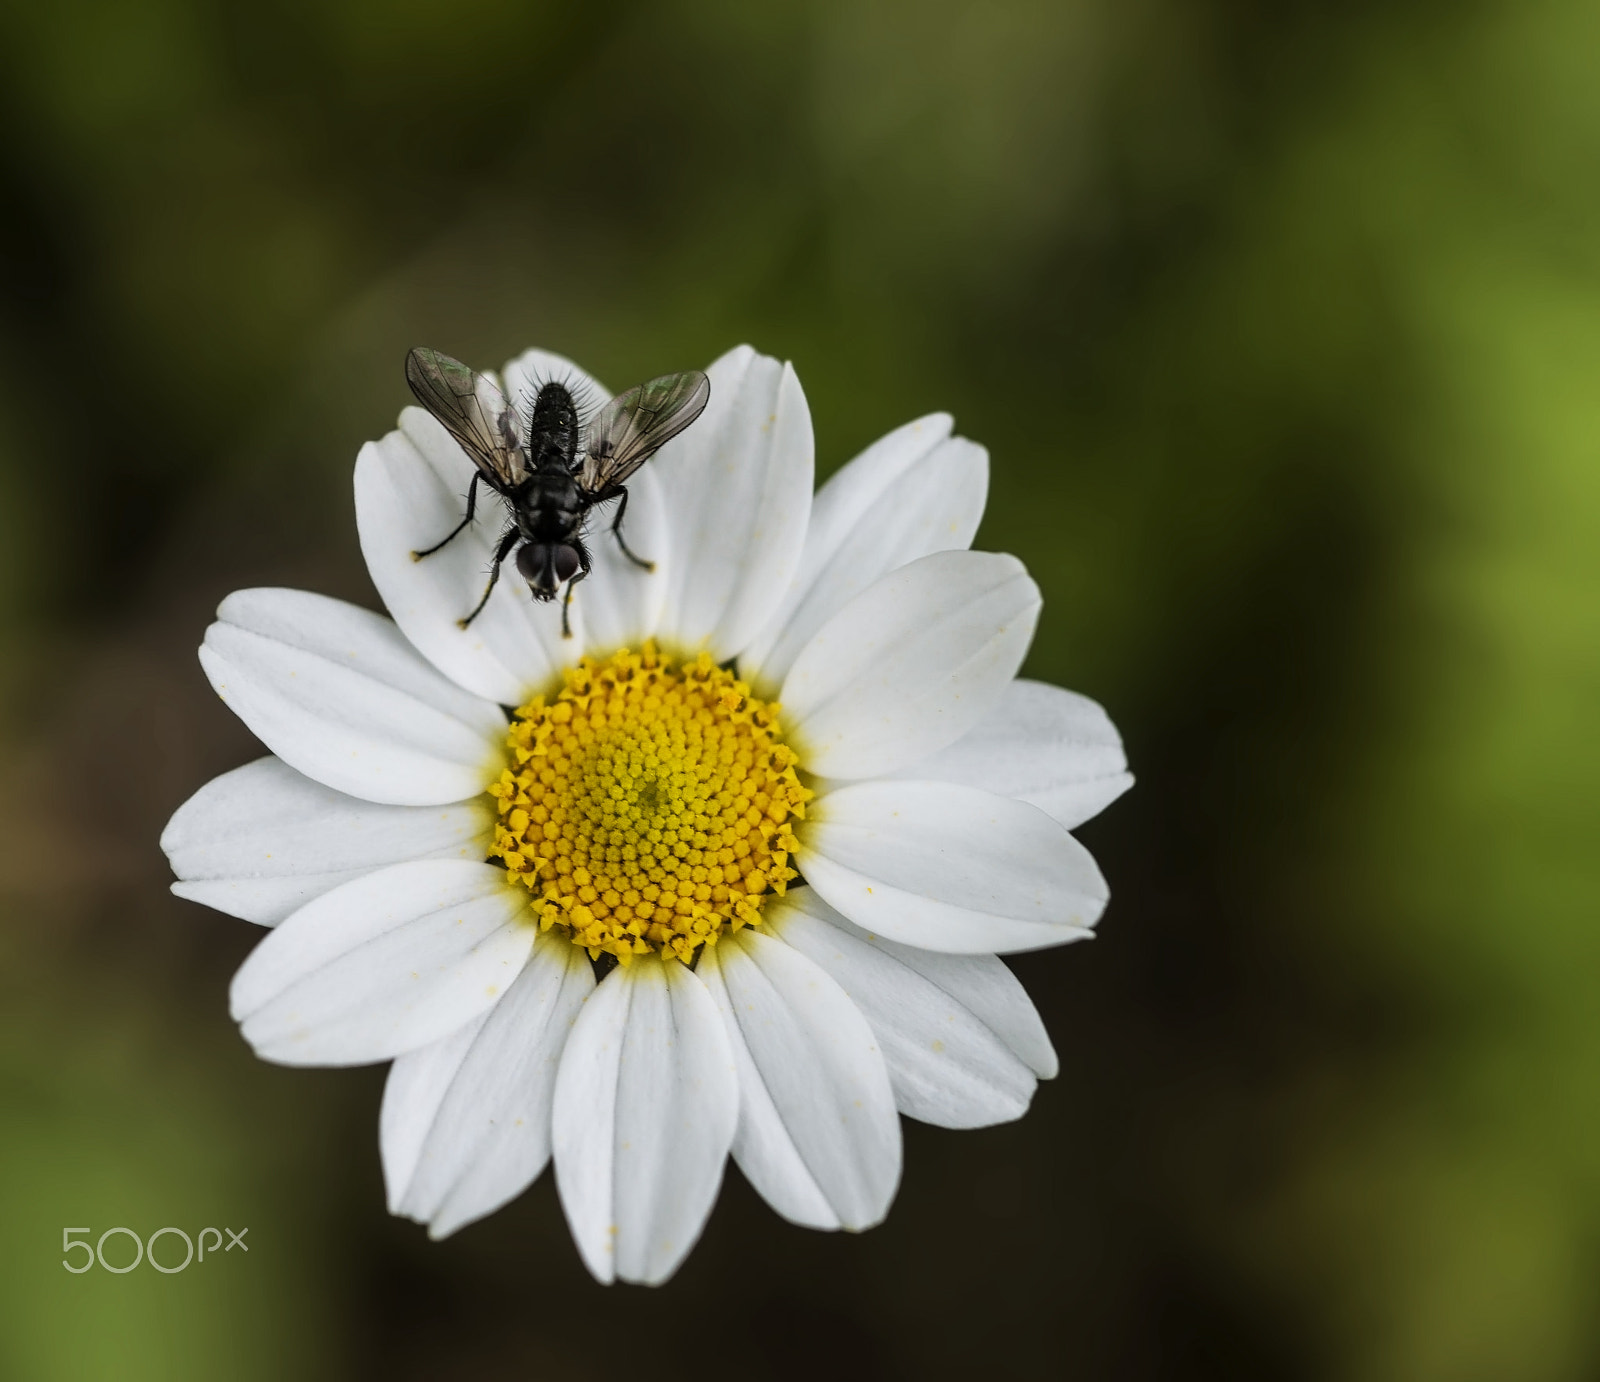 Nikon D800E + AF Micro-Nikkor 55mm f/2.8 sample photo. Papatya ve sinek (daisy and fly) photography